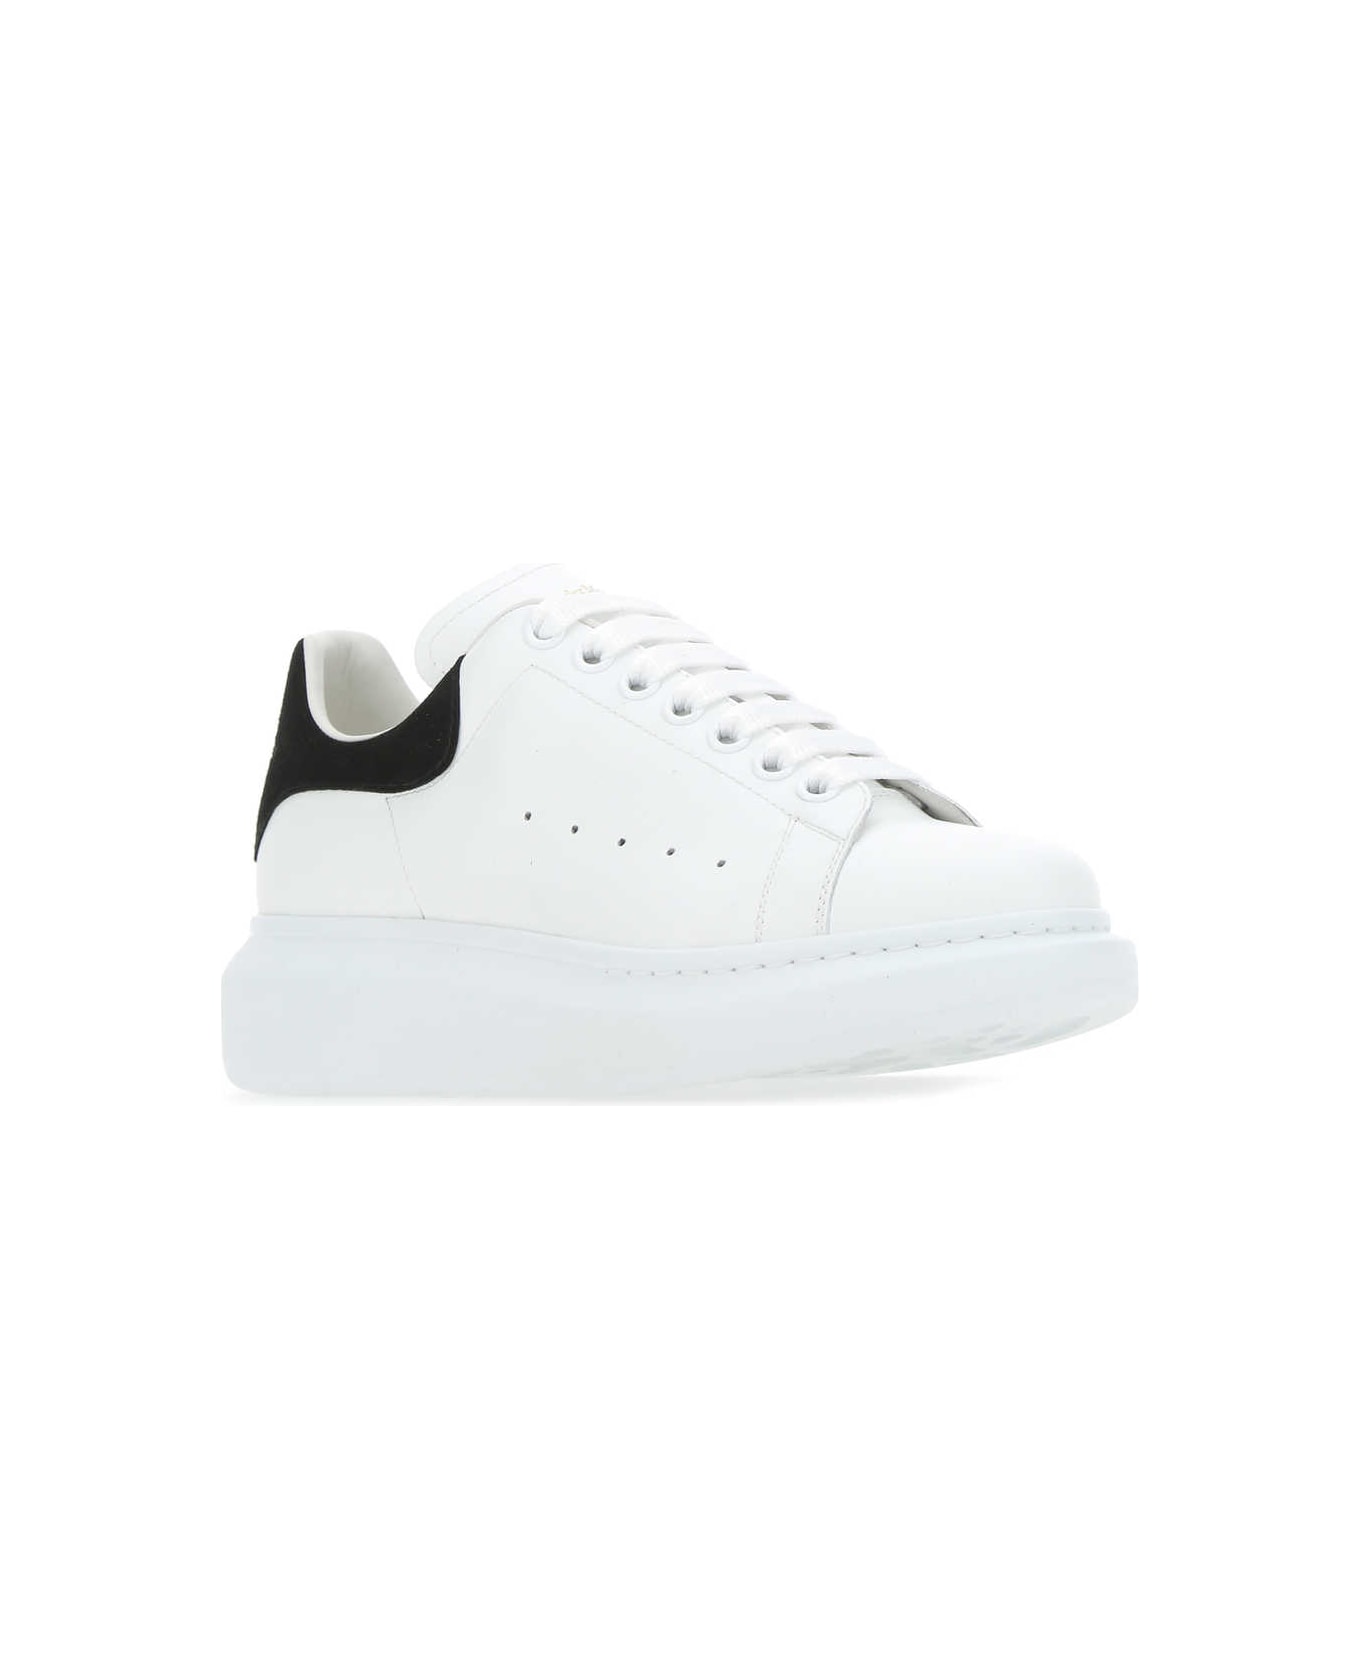 Alexander McQueen White Leather Sneakers With Black Suede Heel - 9061